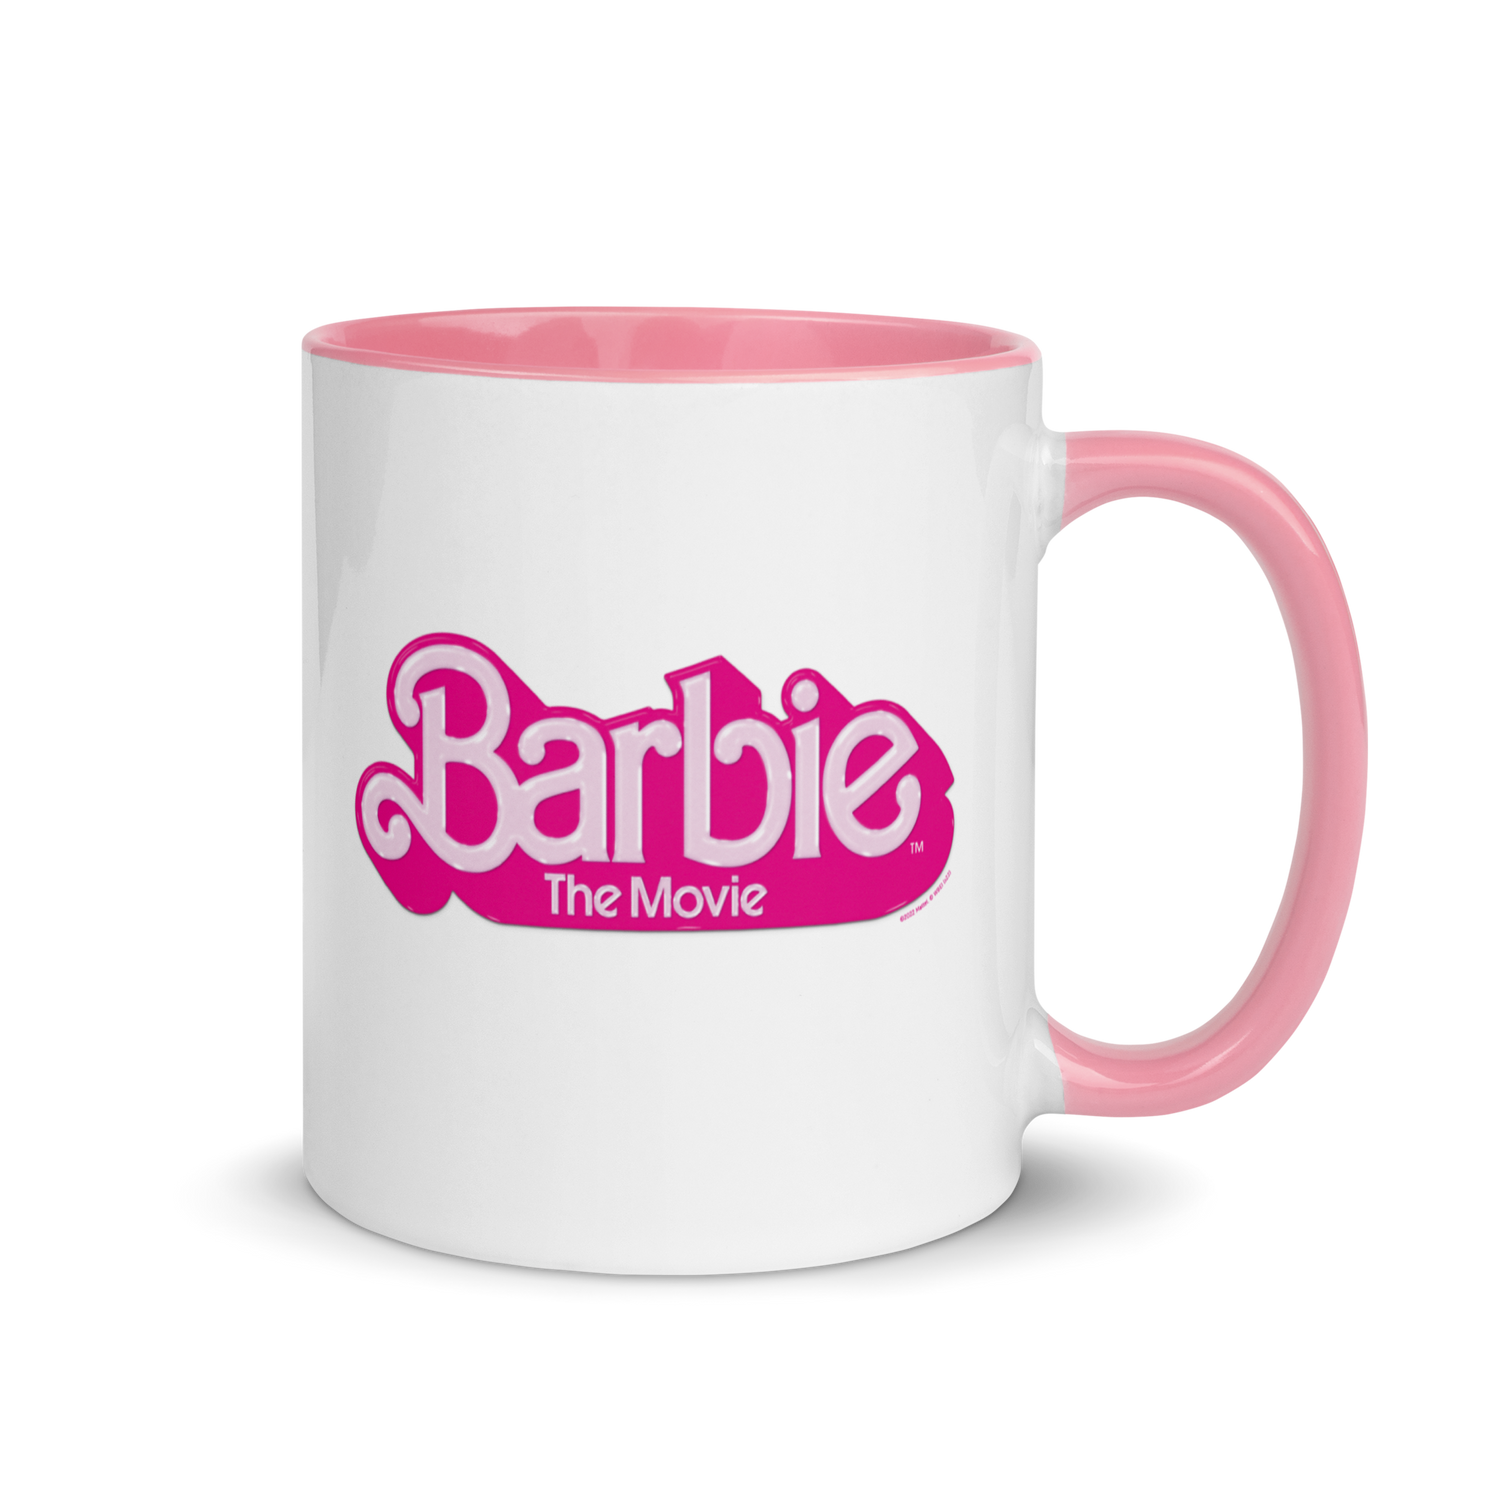 white-ceramic-mug-with-color-inside-pink-11oz-right-638928c7807c2_1500x.png